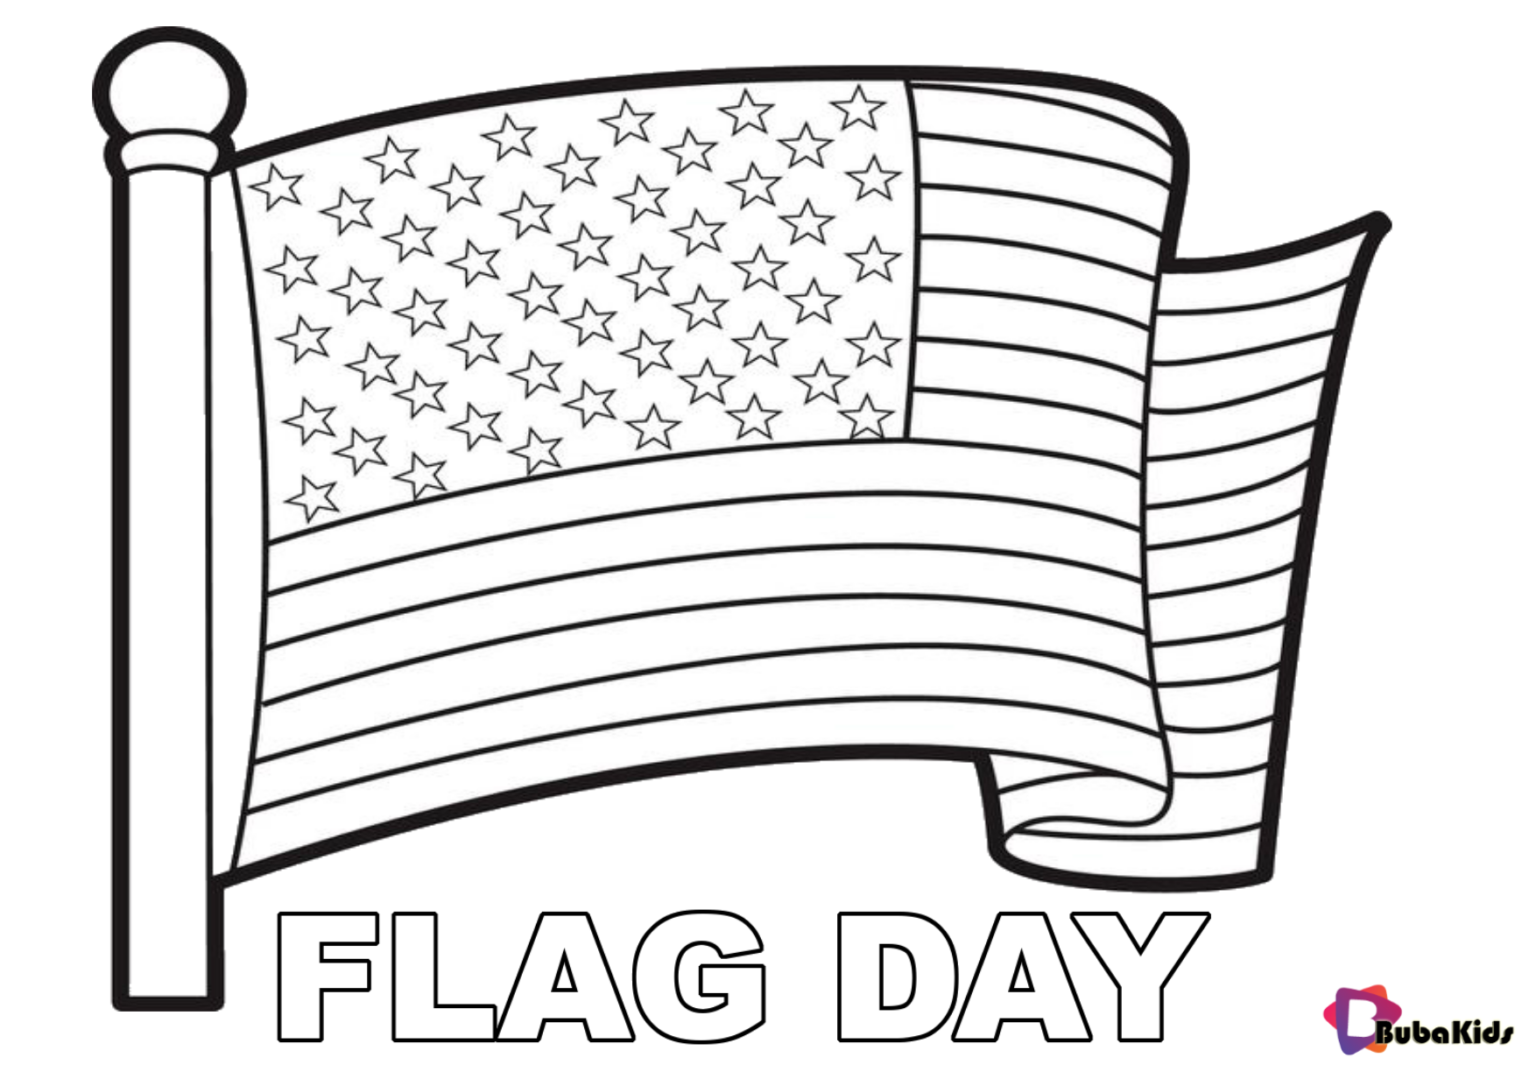 flag-day-coloring-pages-for-kids-bubakids